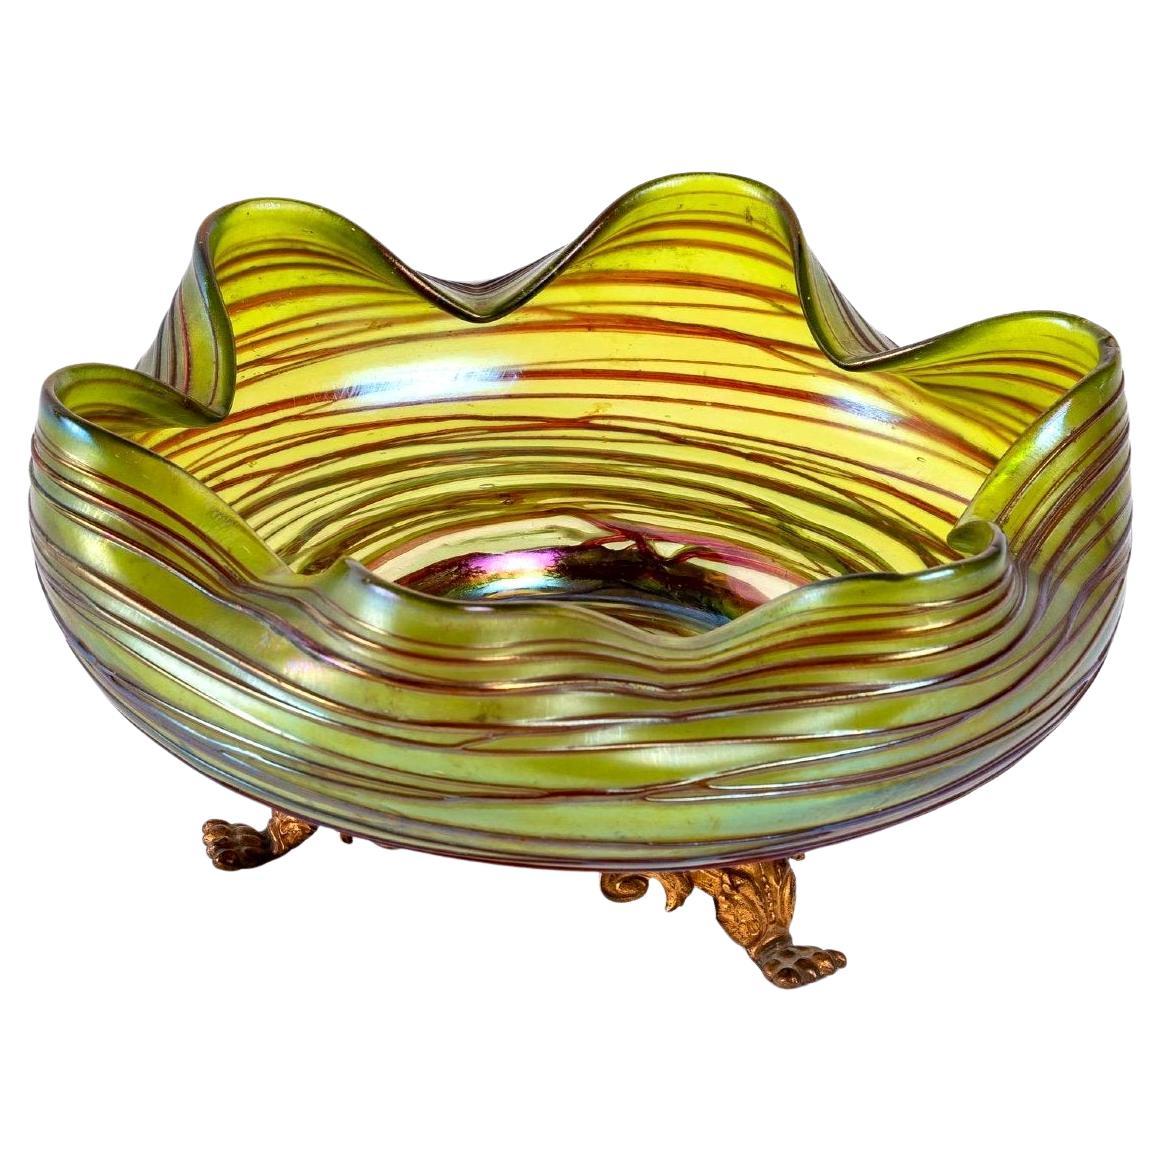 Iridescent Glass Bowl with Tripod Base, Manufacture Loetz